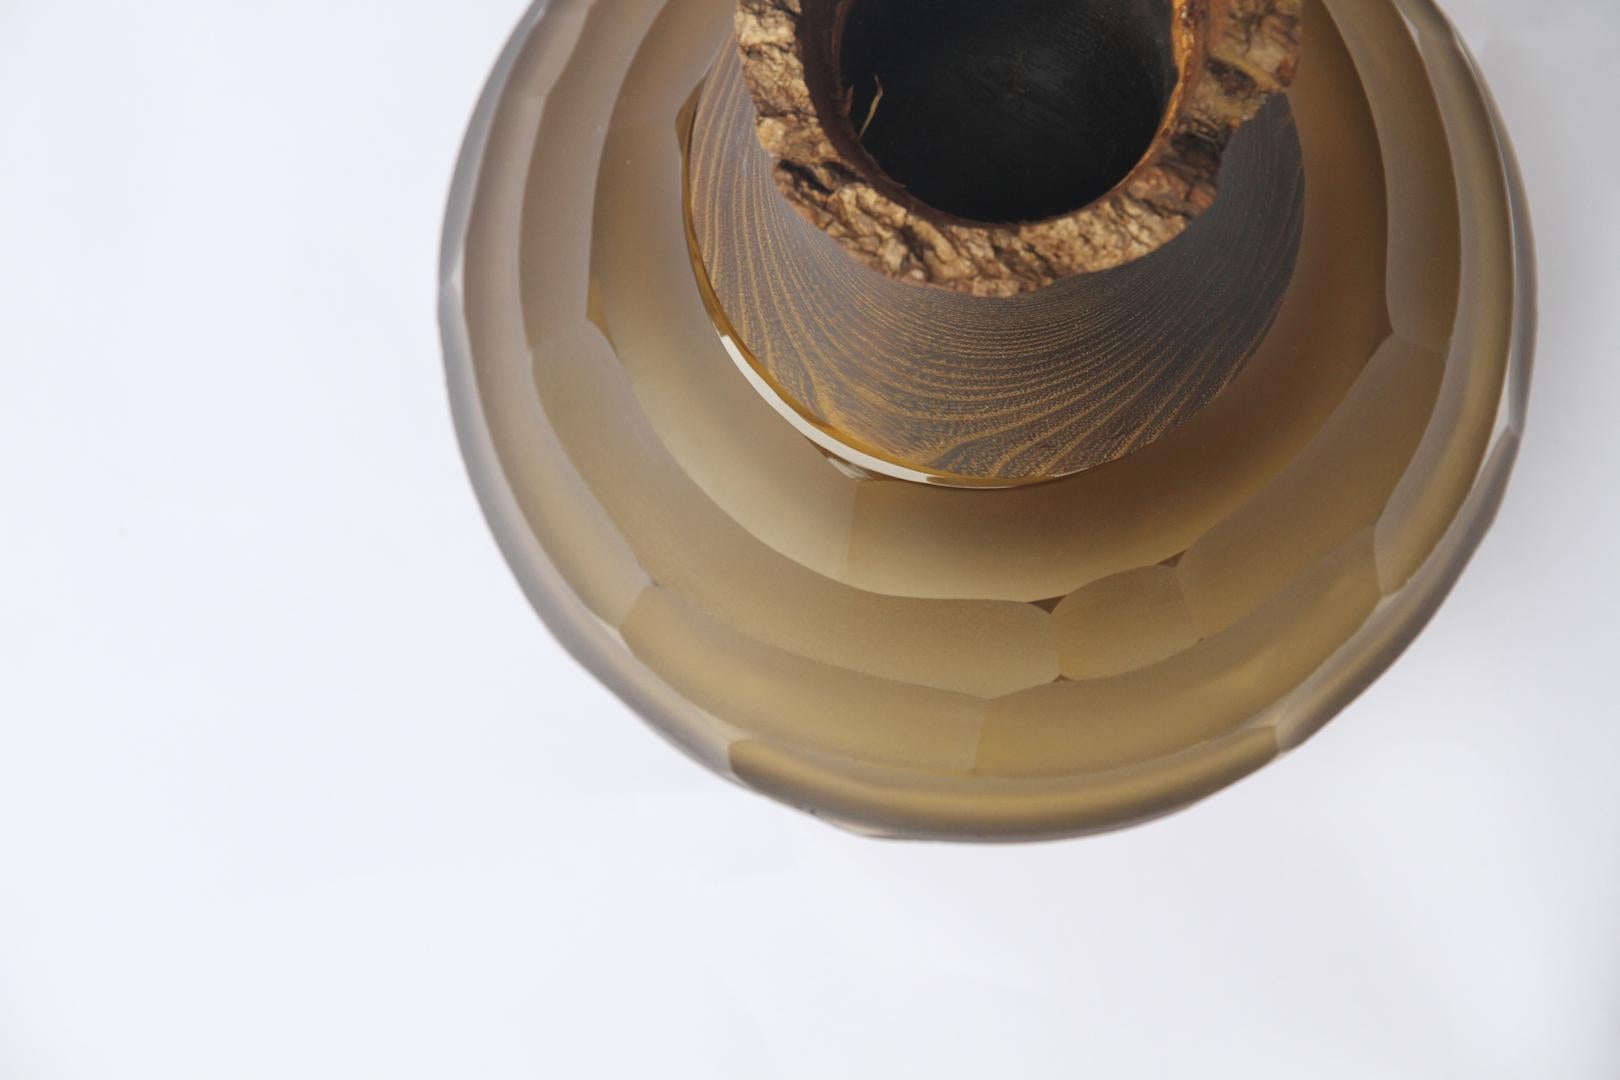 Sculpted blown glass and brass vase - Pia Wüstenberg
Dimensions: Height 30cm, diameter 23cm
Both rough and refined, this assortment plays with the multiple metamorphosis glass grants as a material. The glass is first handblown, and then cold